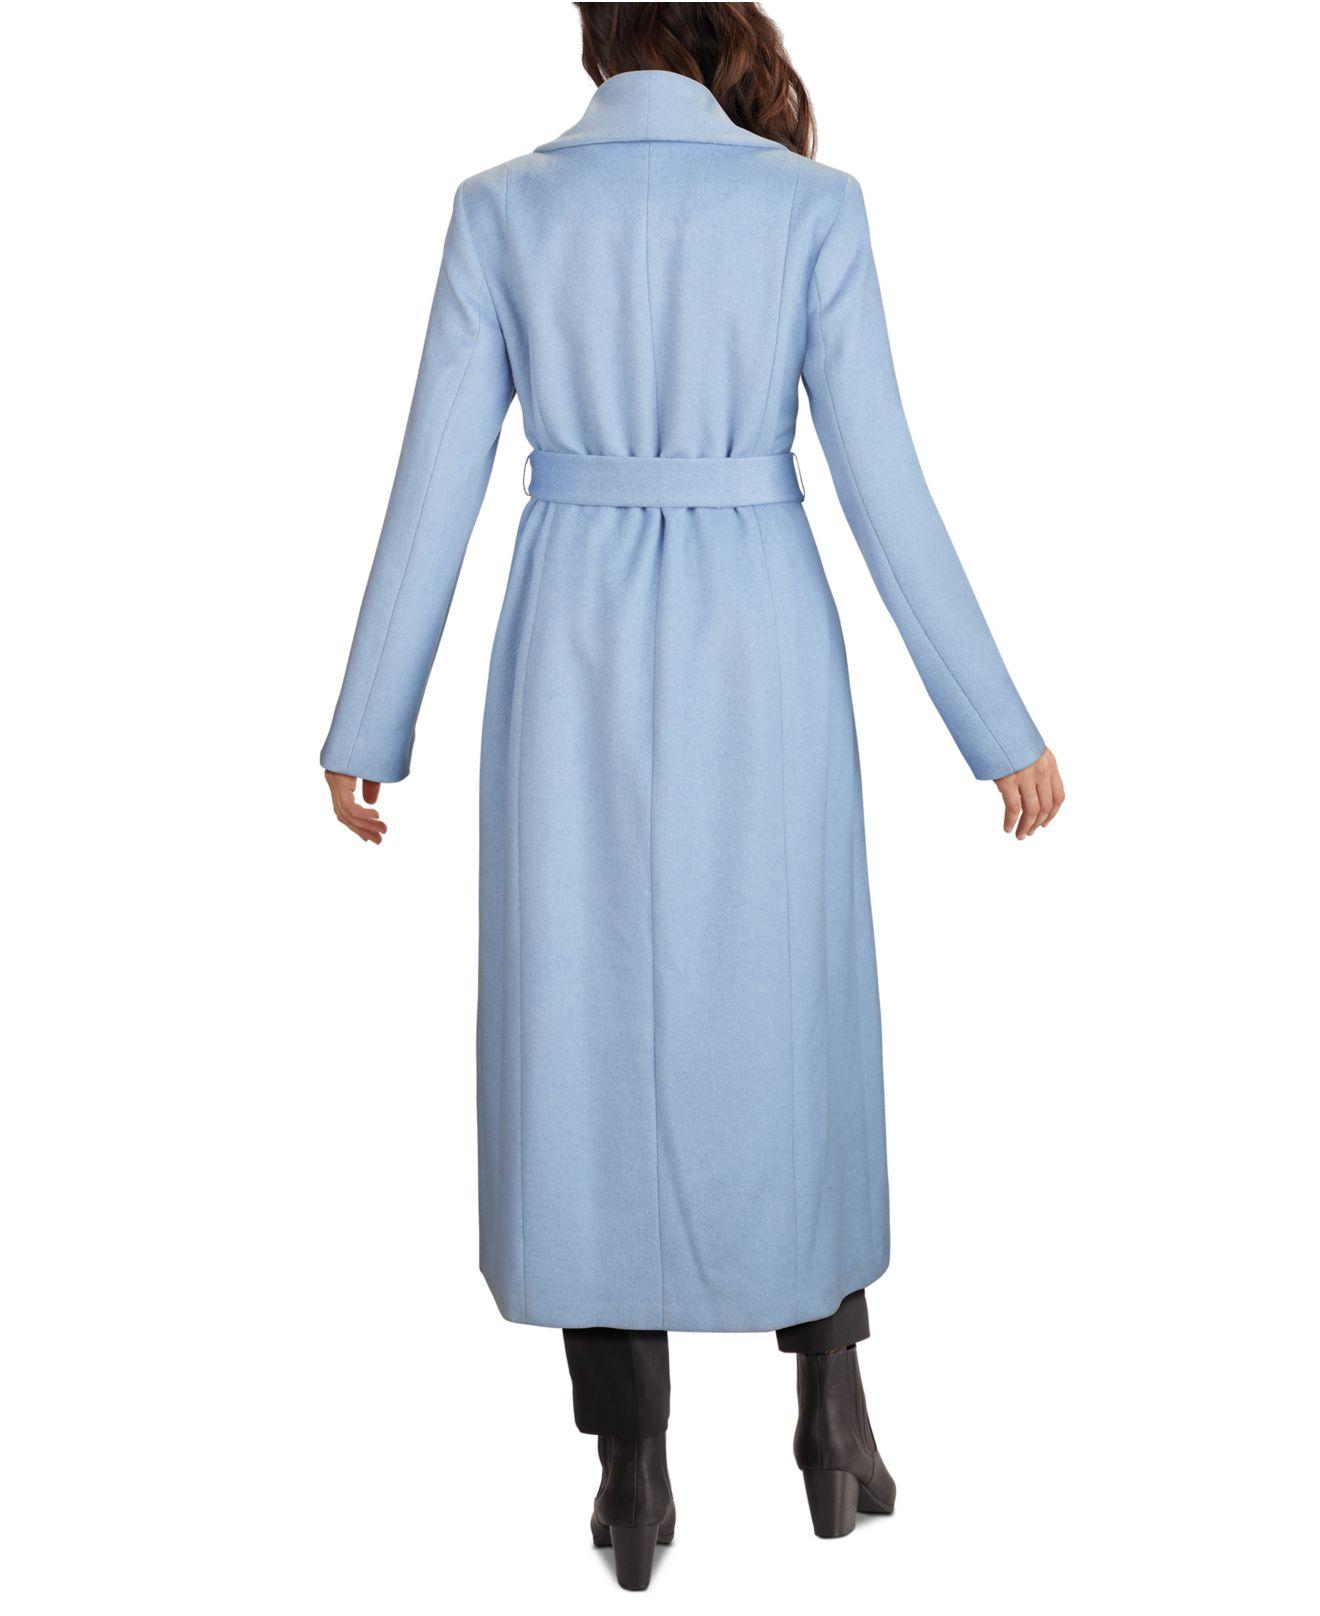 Cole Haan Wool Belted Wrap Coat in Ice Blue (Blue) - Lyst